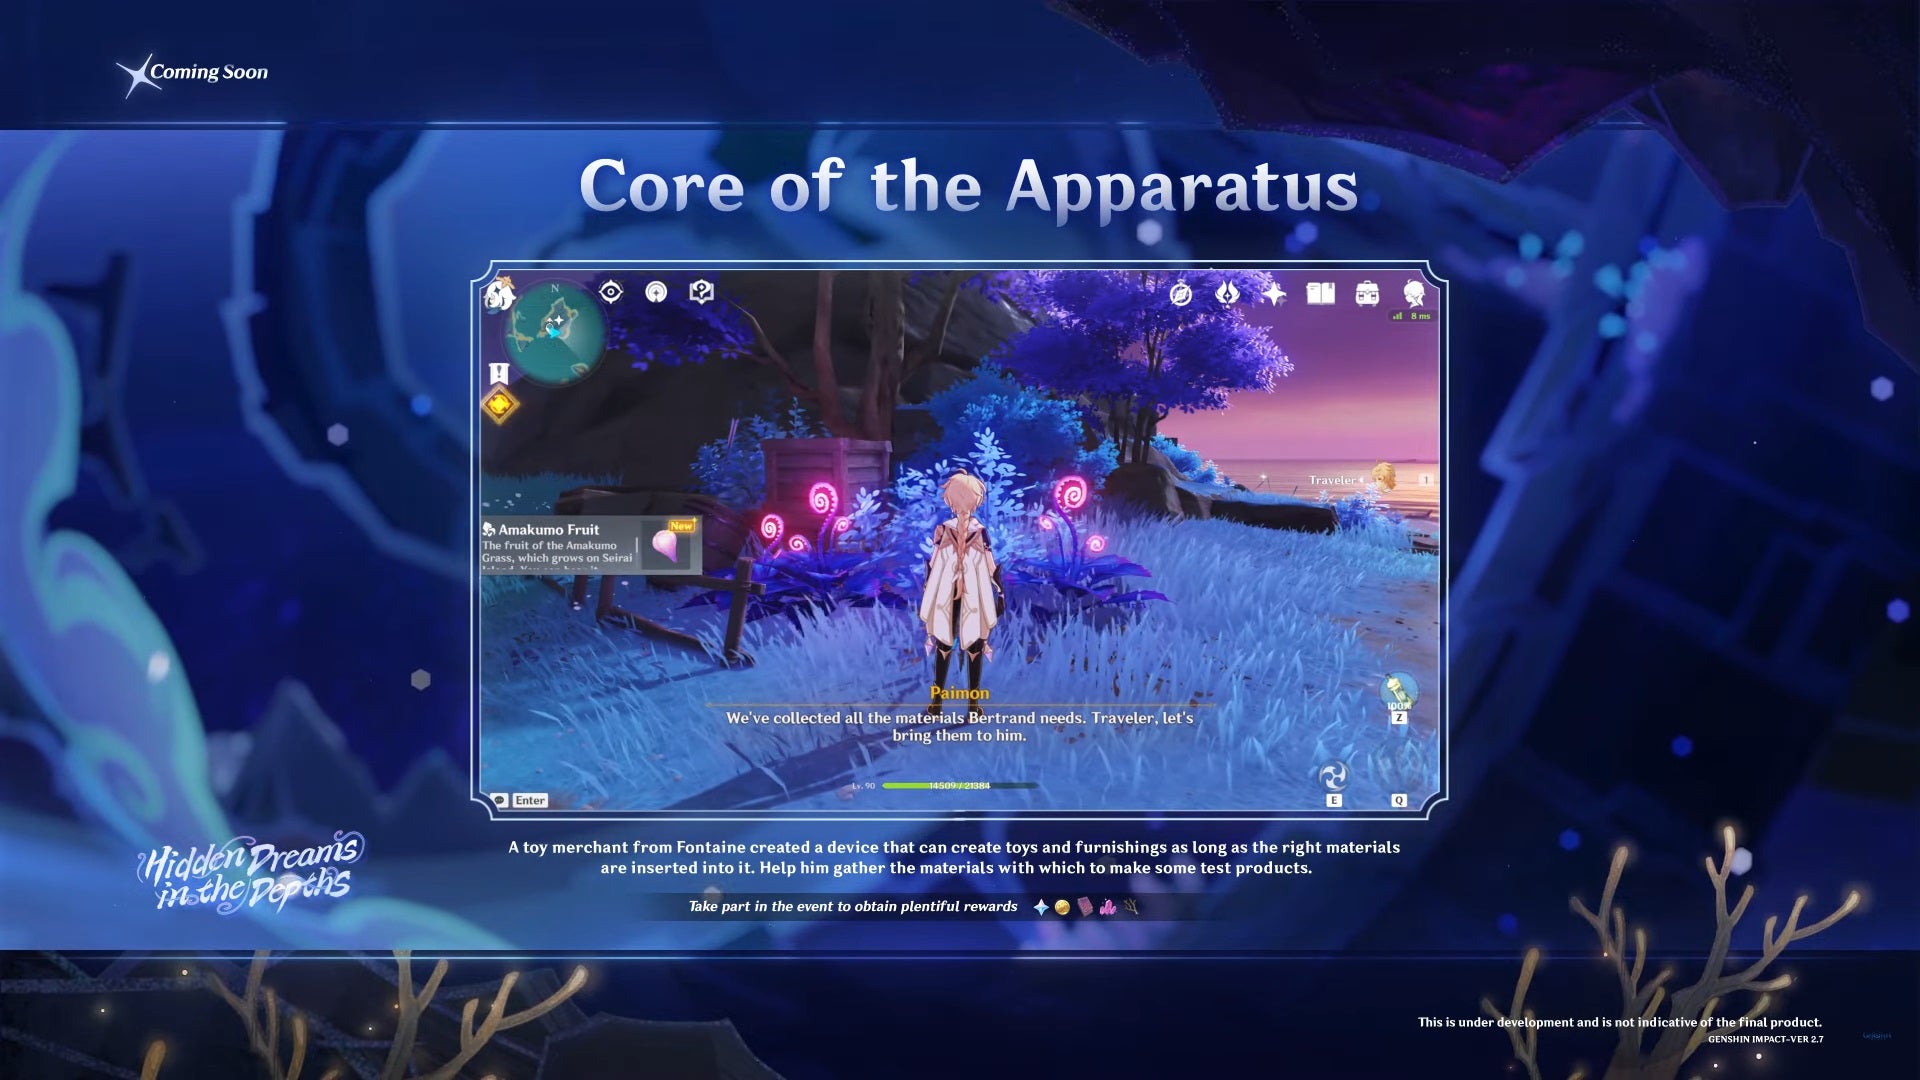 The core of the aparatus event in Genshin Impact version 2.7